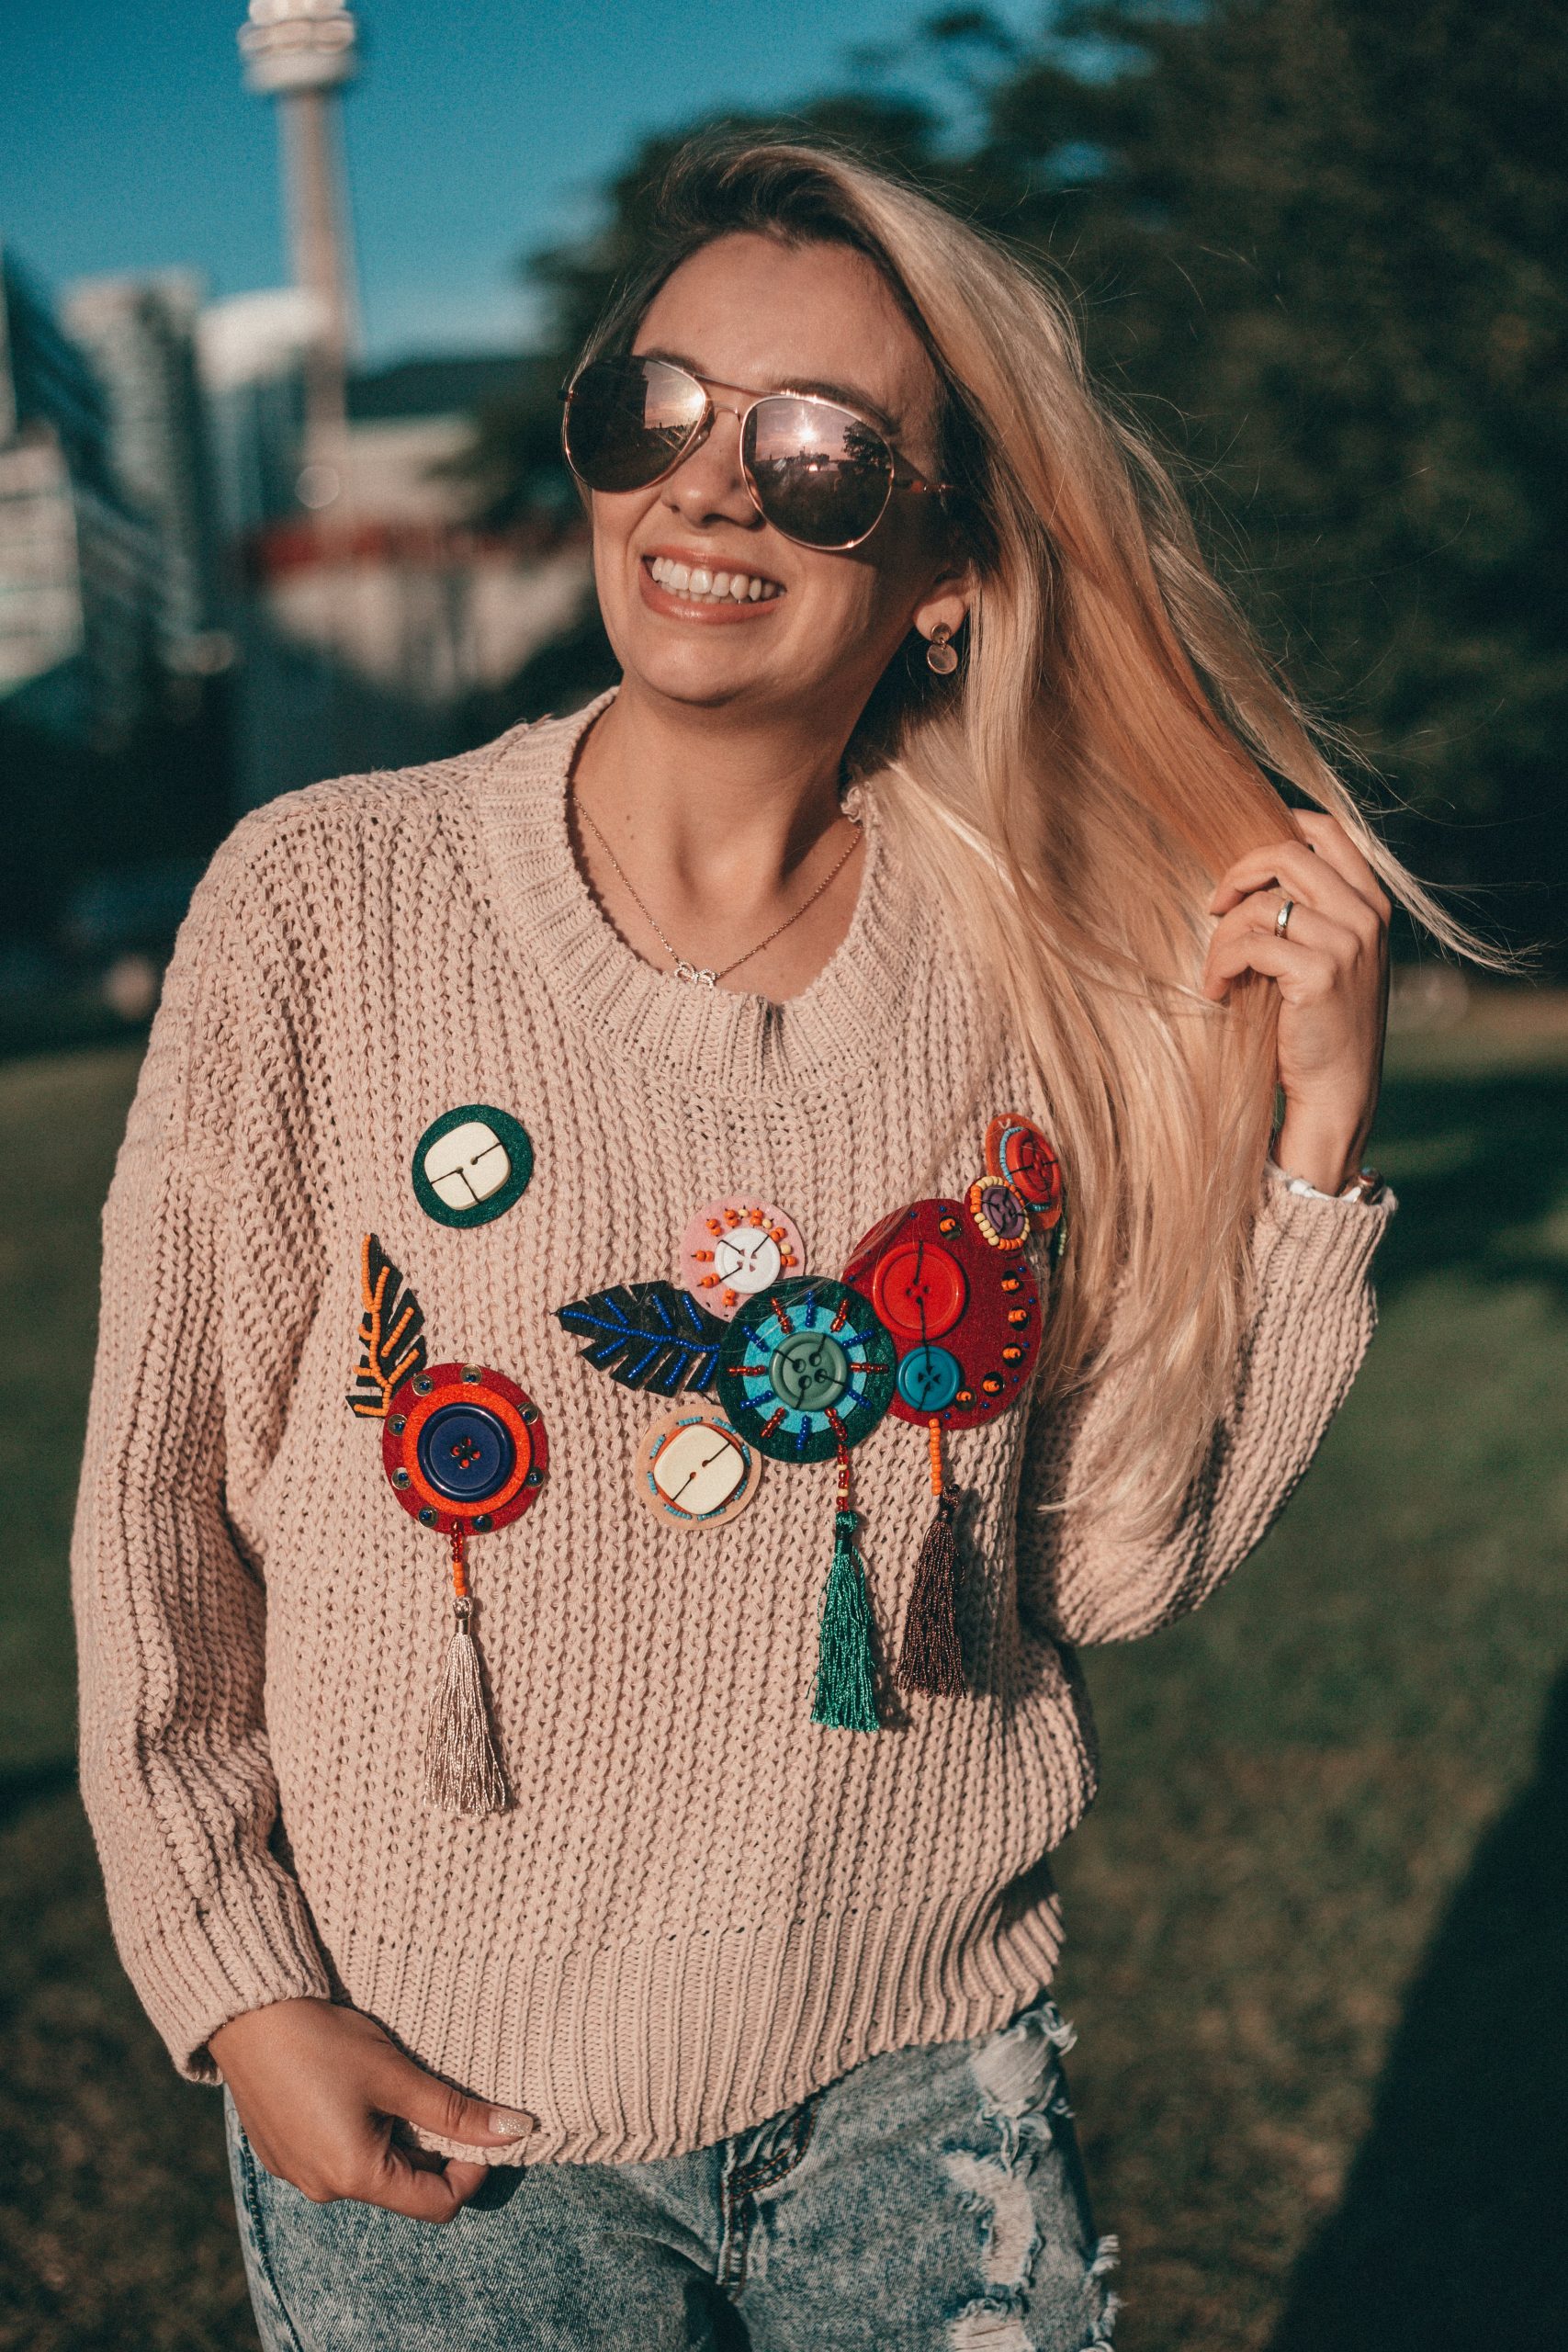 Dressed by Lu Beaded Knit Sweater